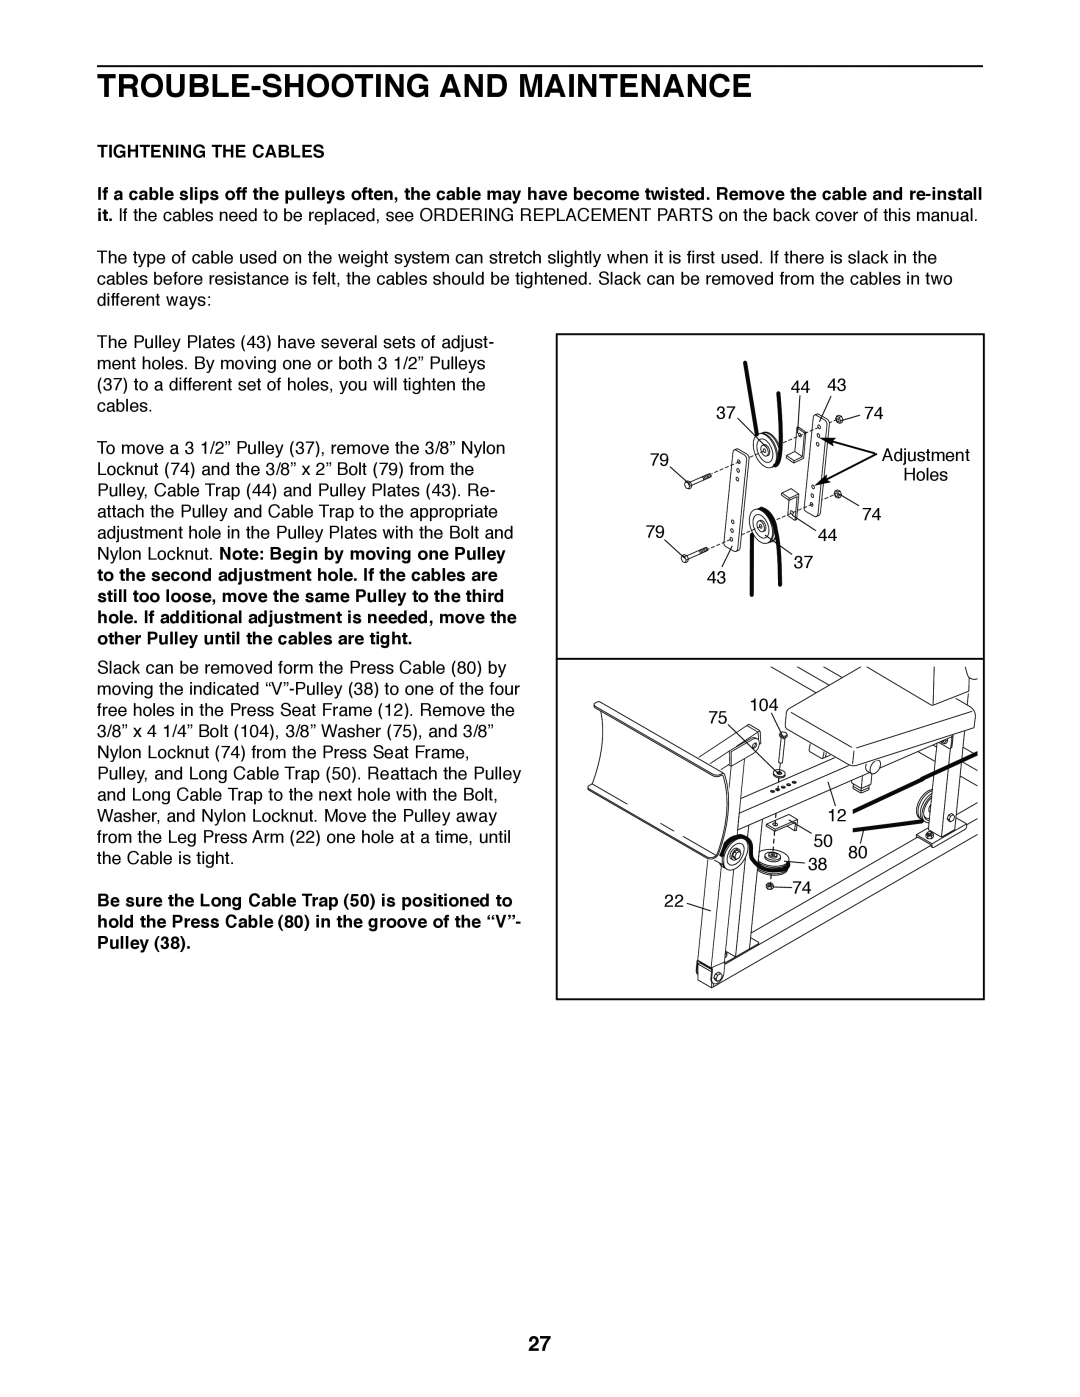 Weider 831.159530 user manual Trouble-Shooting And Maintenance, Tightening The Cables 